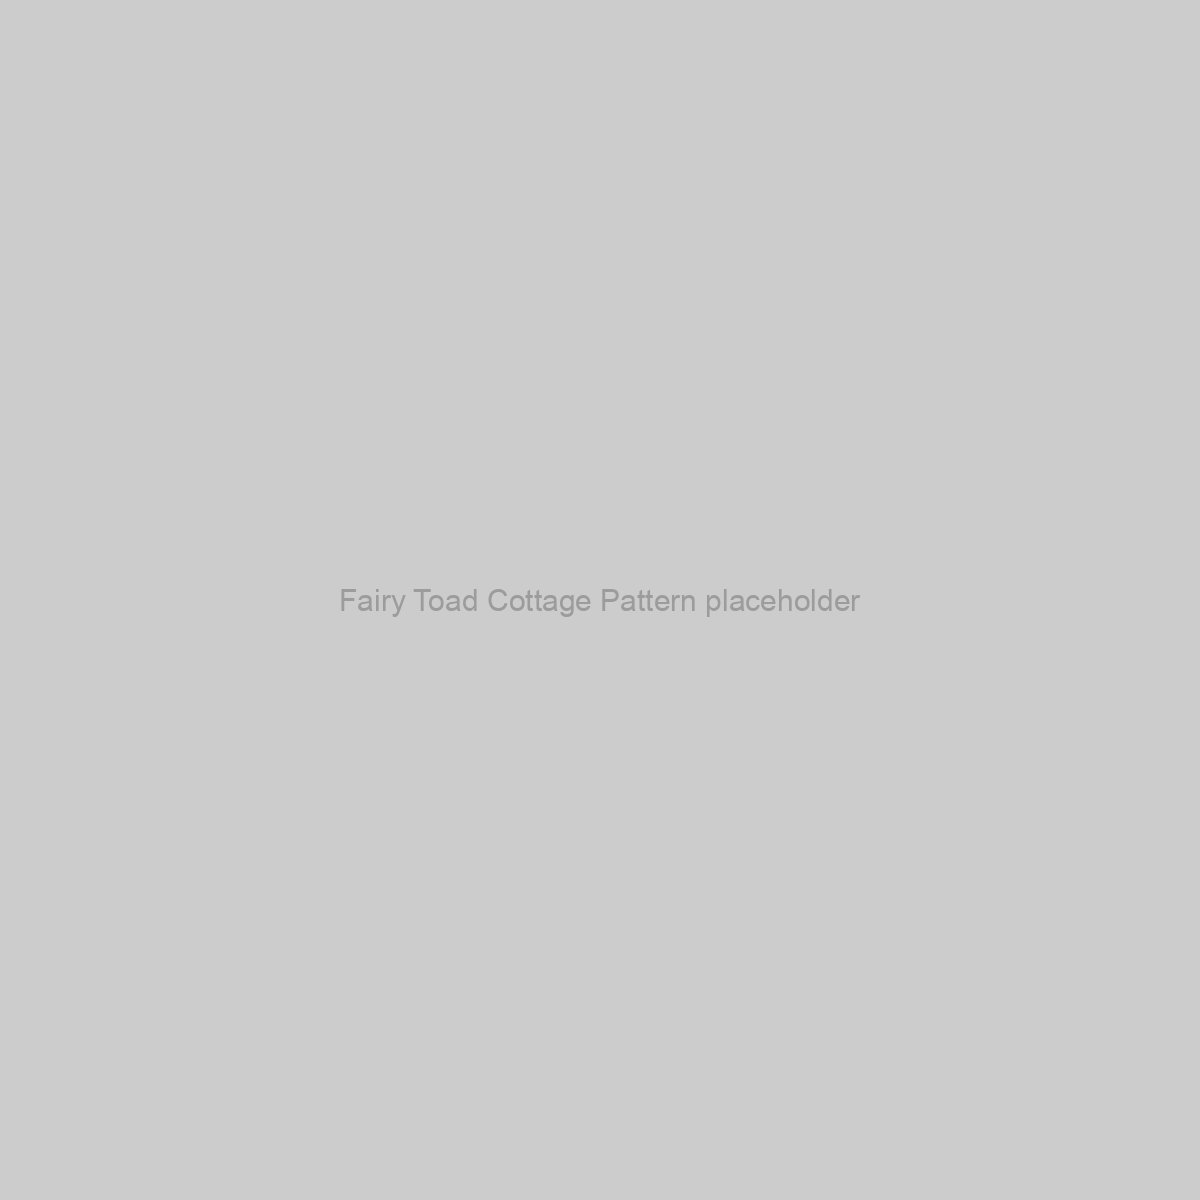 Fairy Toad Cottage Pattern Placeholder Image